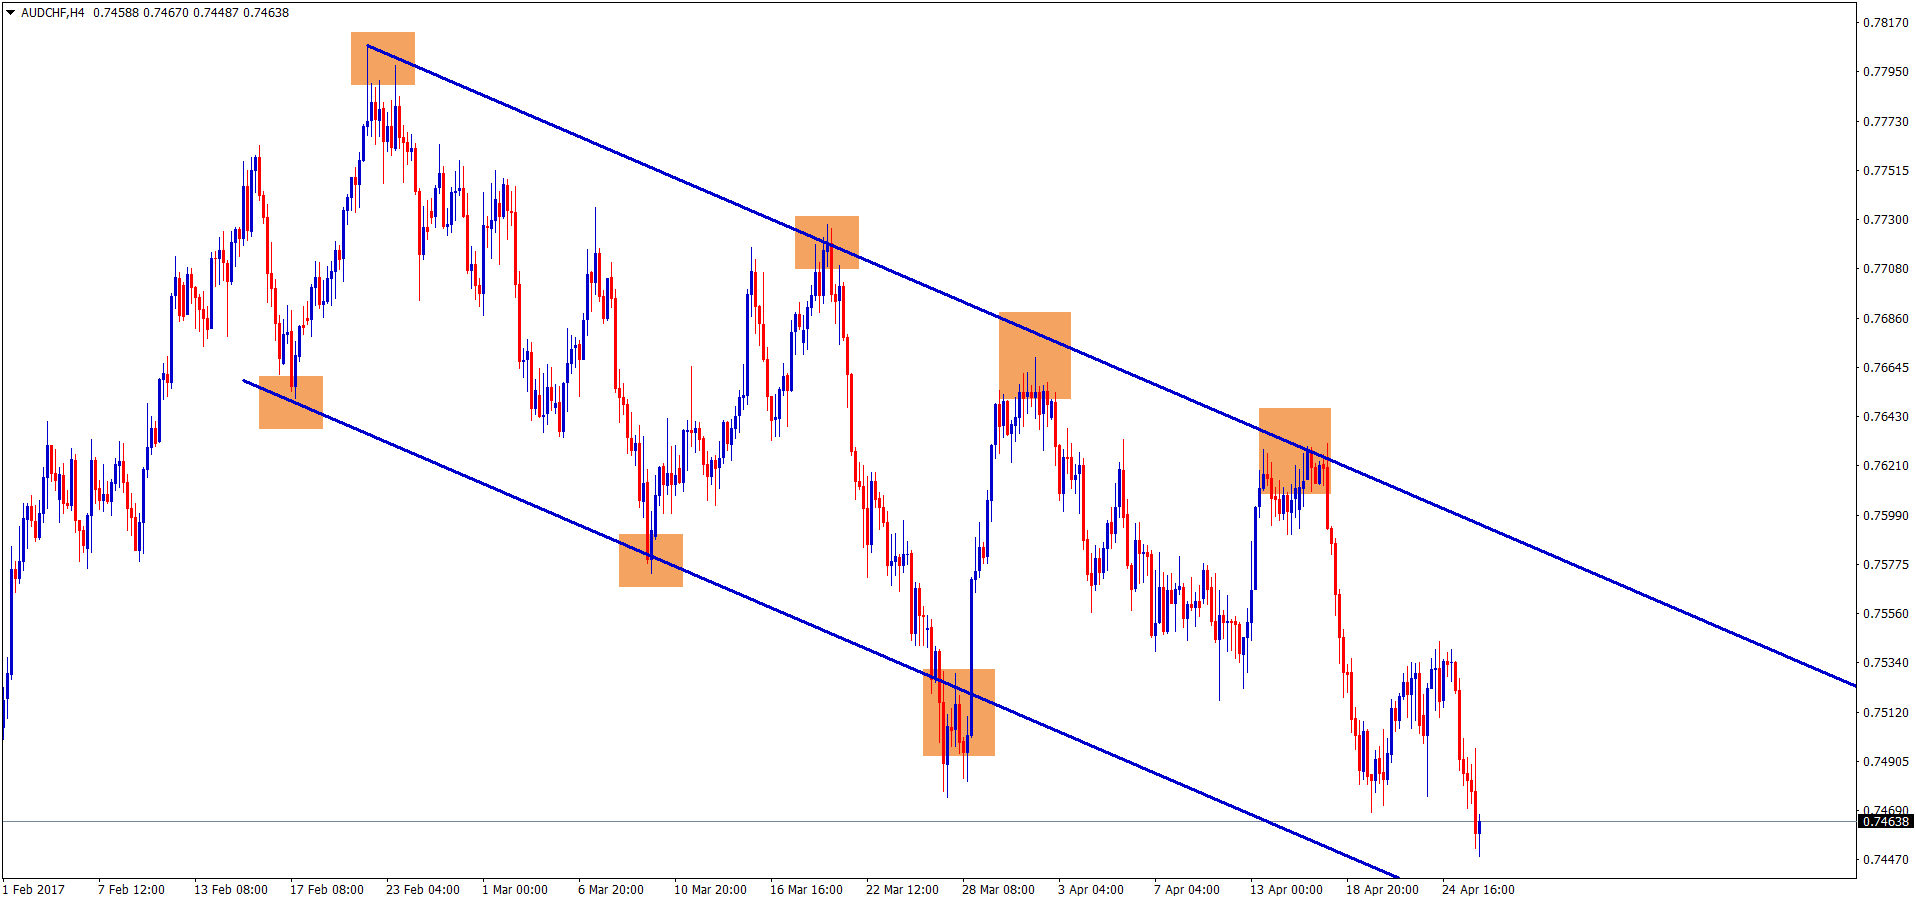 descending channel down trend analysis on audchf